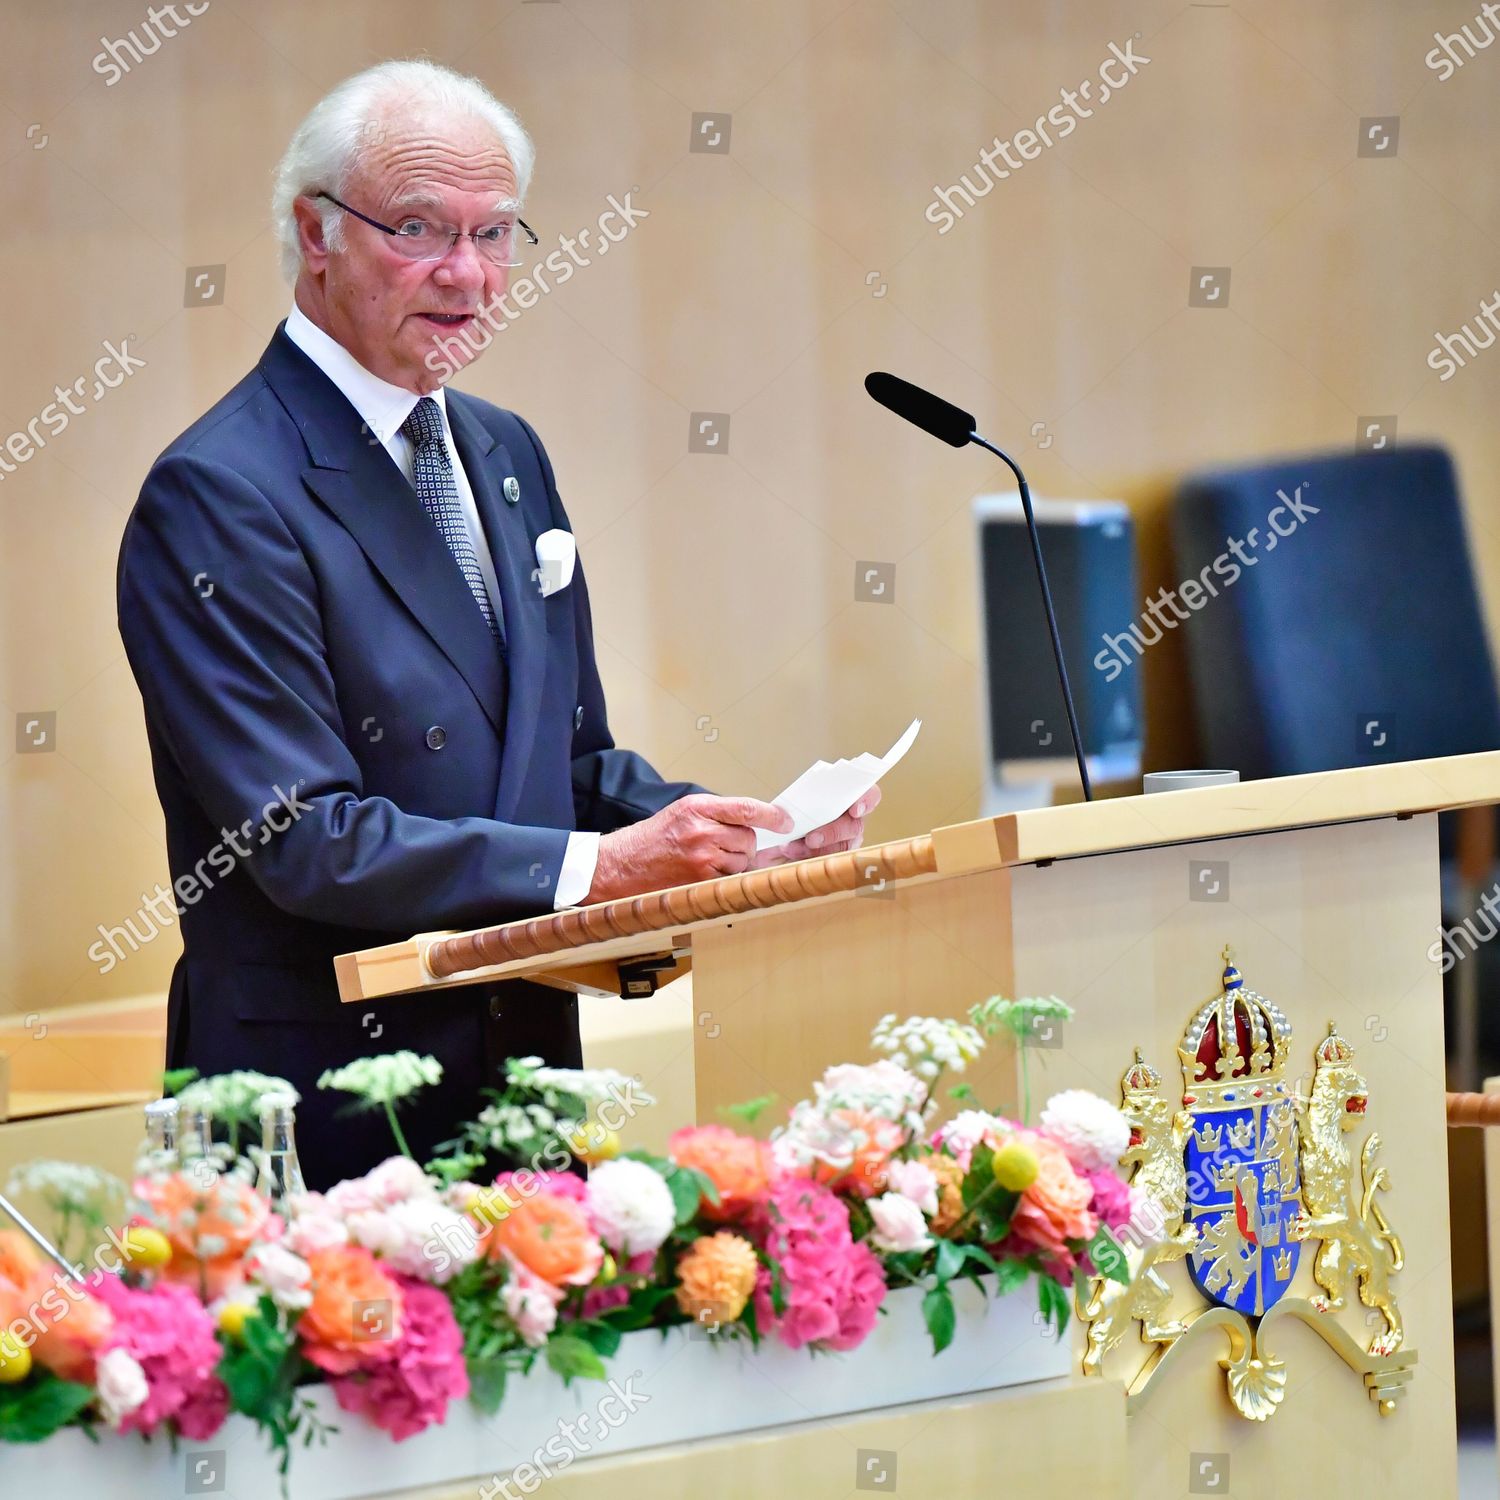 CASA REAL DE SUECIA - Página 63 Opening-of-the-parliamentary-session-stockholm-cathedral-stockholm-sweden-shutterstock-editorial-10769598ad